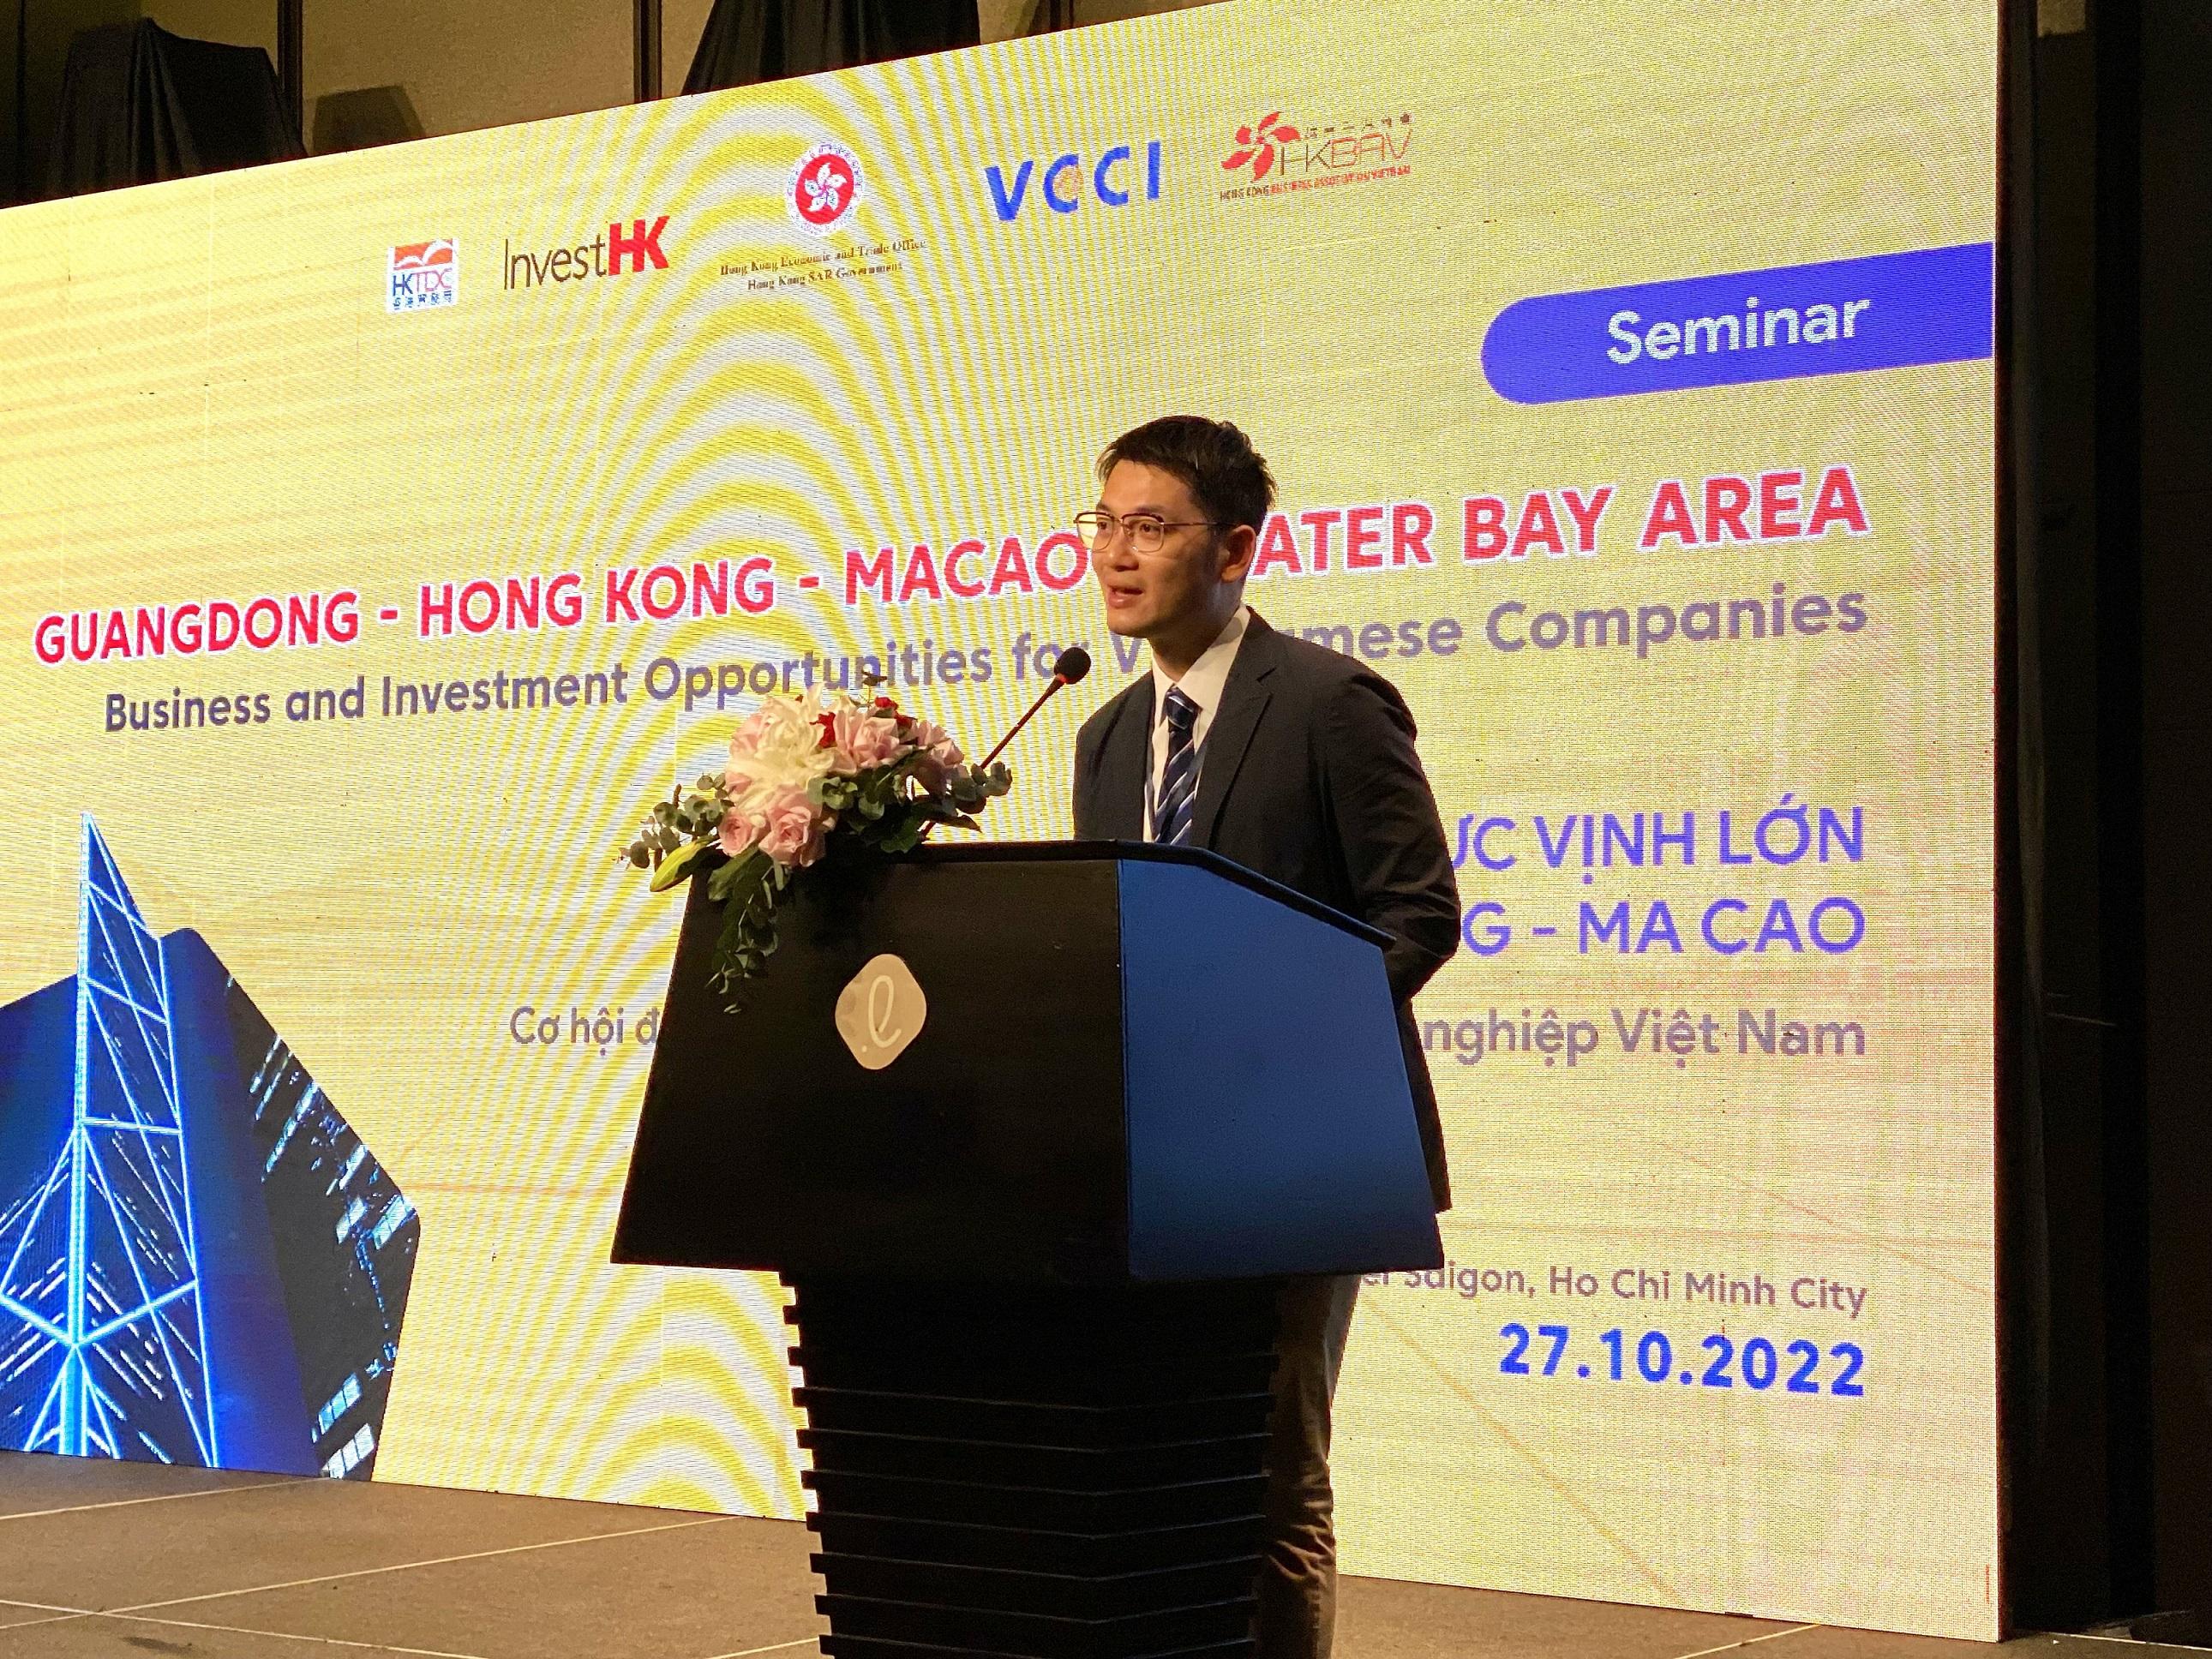 The Hong Kong Economic and Trade Office in Singapore (Singapore ETO) hosted a business seminar entitled "Guangdong-Hong Kong-Macao Greater Bay Area: Business and Investment Opportunities for Vietnamese Companies" in Ho Chi Minh City, Vietnam today (October 27). Photo shows the Director of Singapore ETO, Mr Wong Chun To, giving an opening remarks at the business seminar.